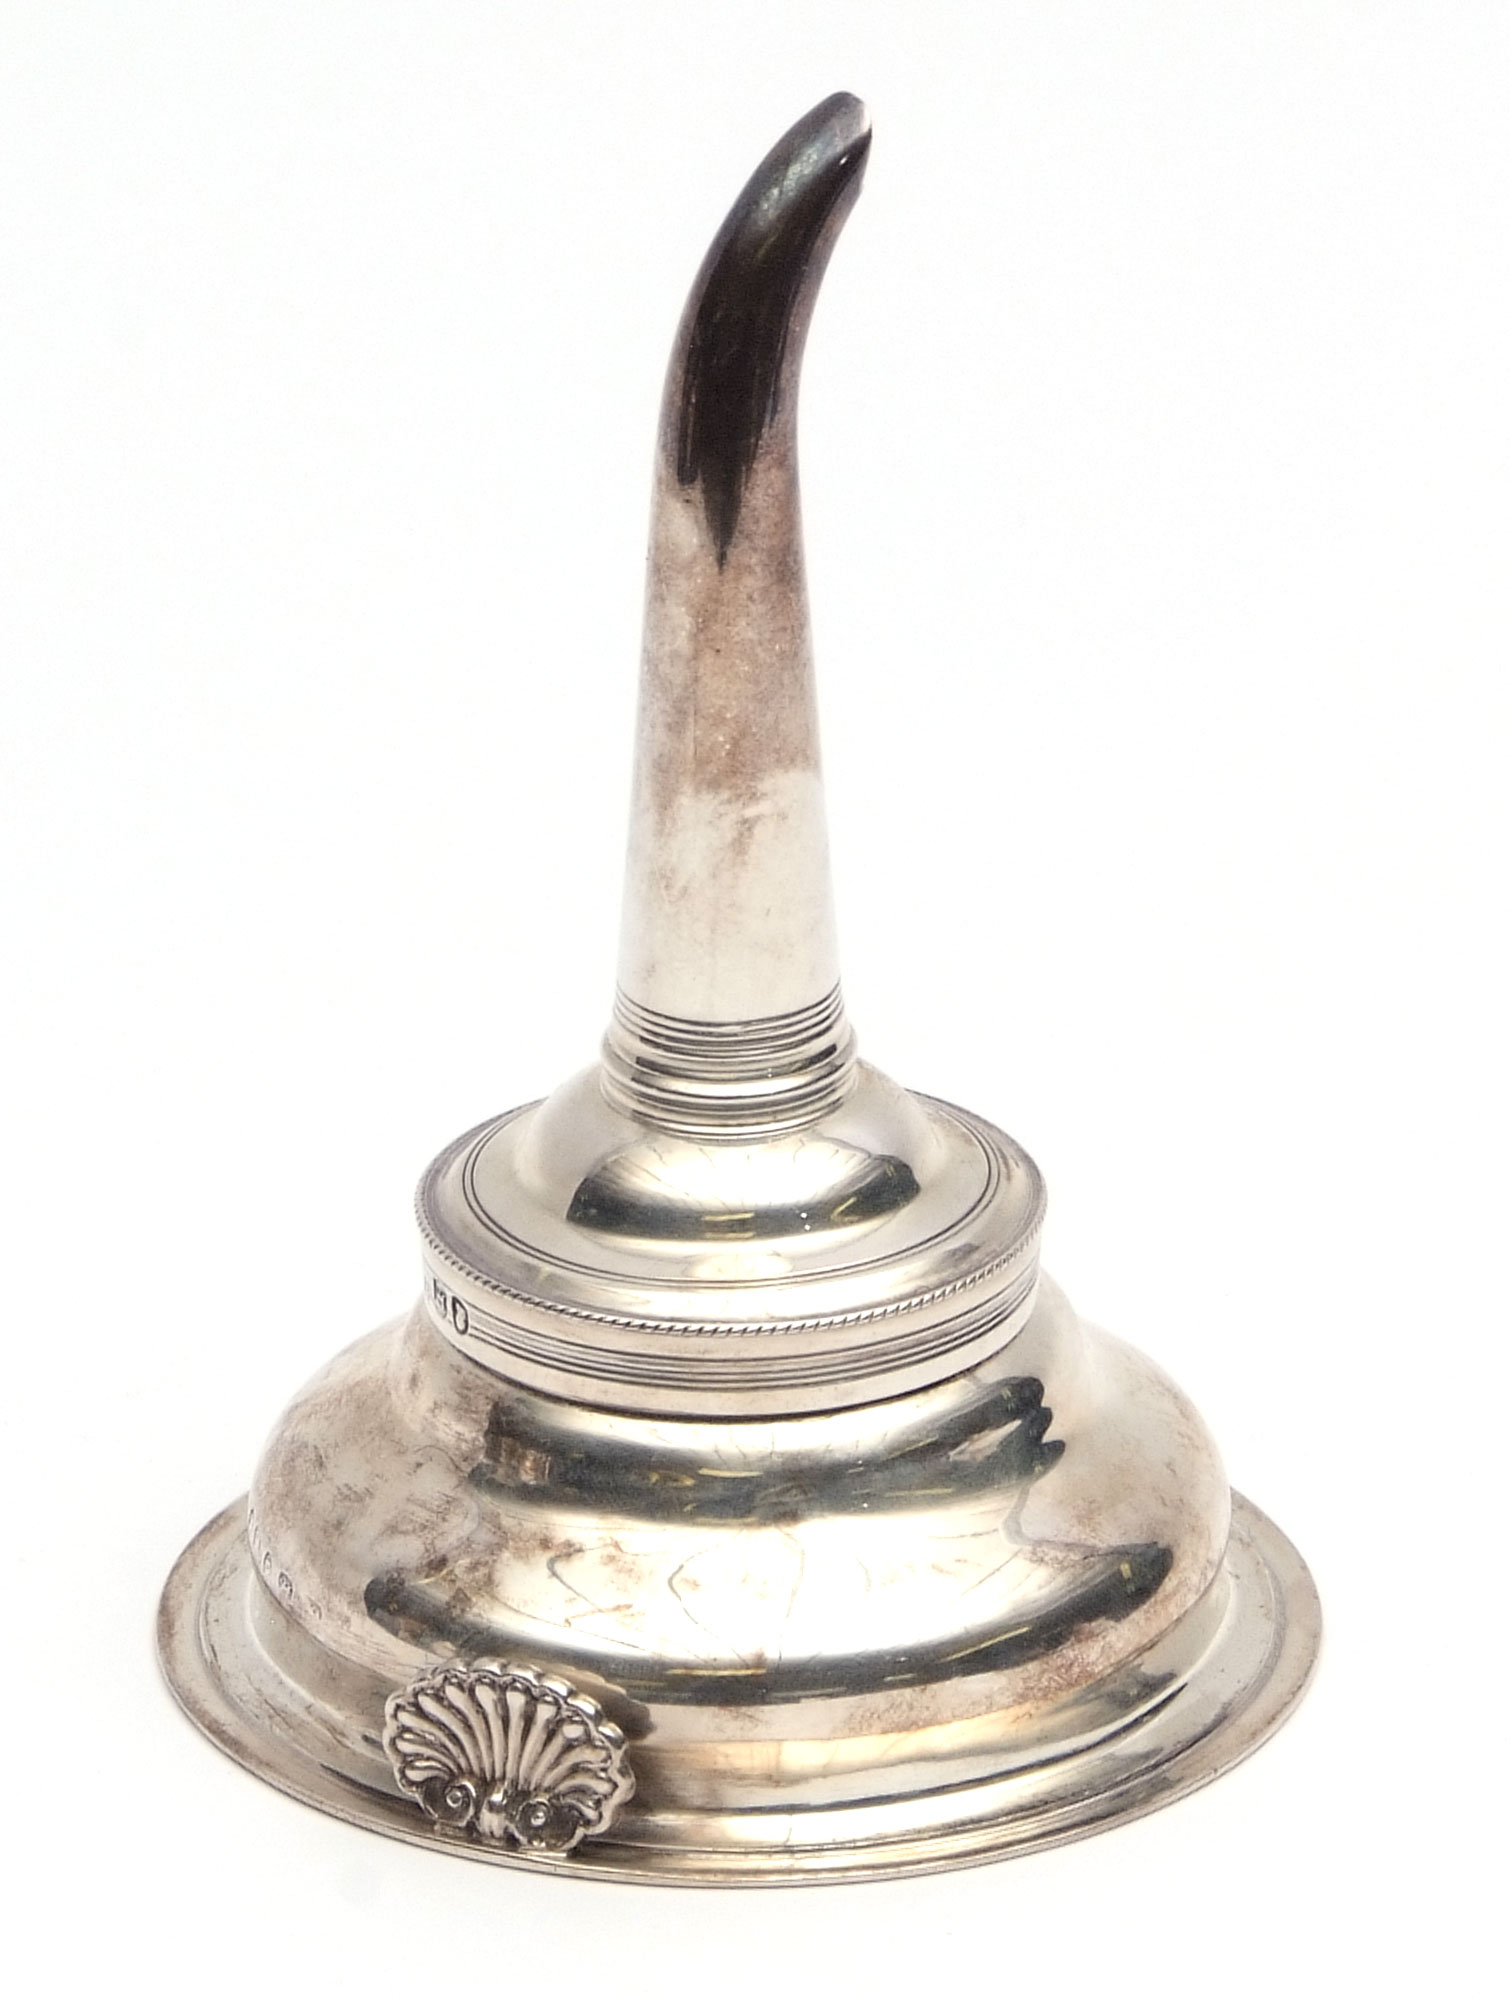 Late George III two-part wine funnel, the bowl with reeded rim and shell thumb piece and spout